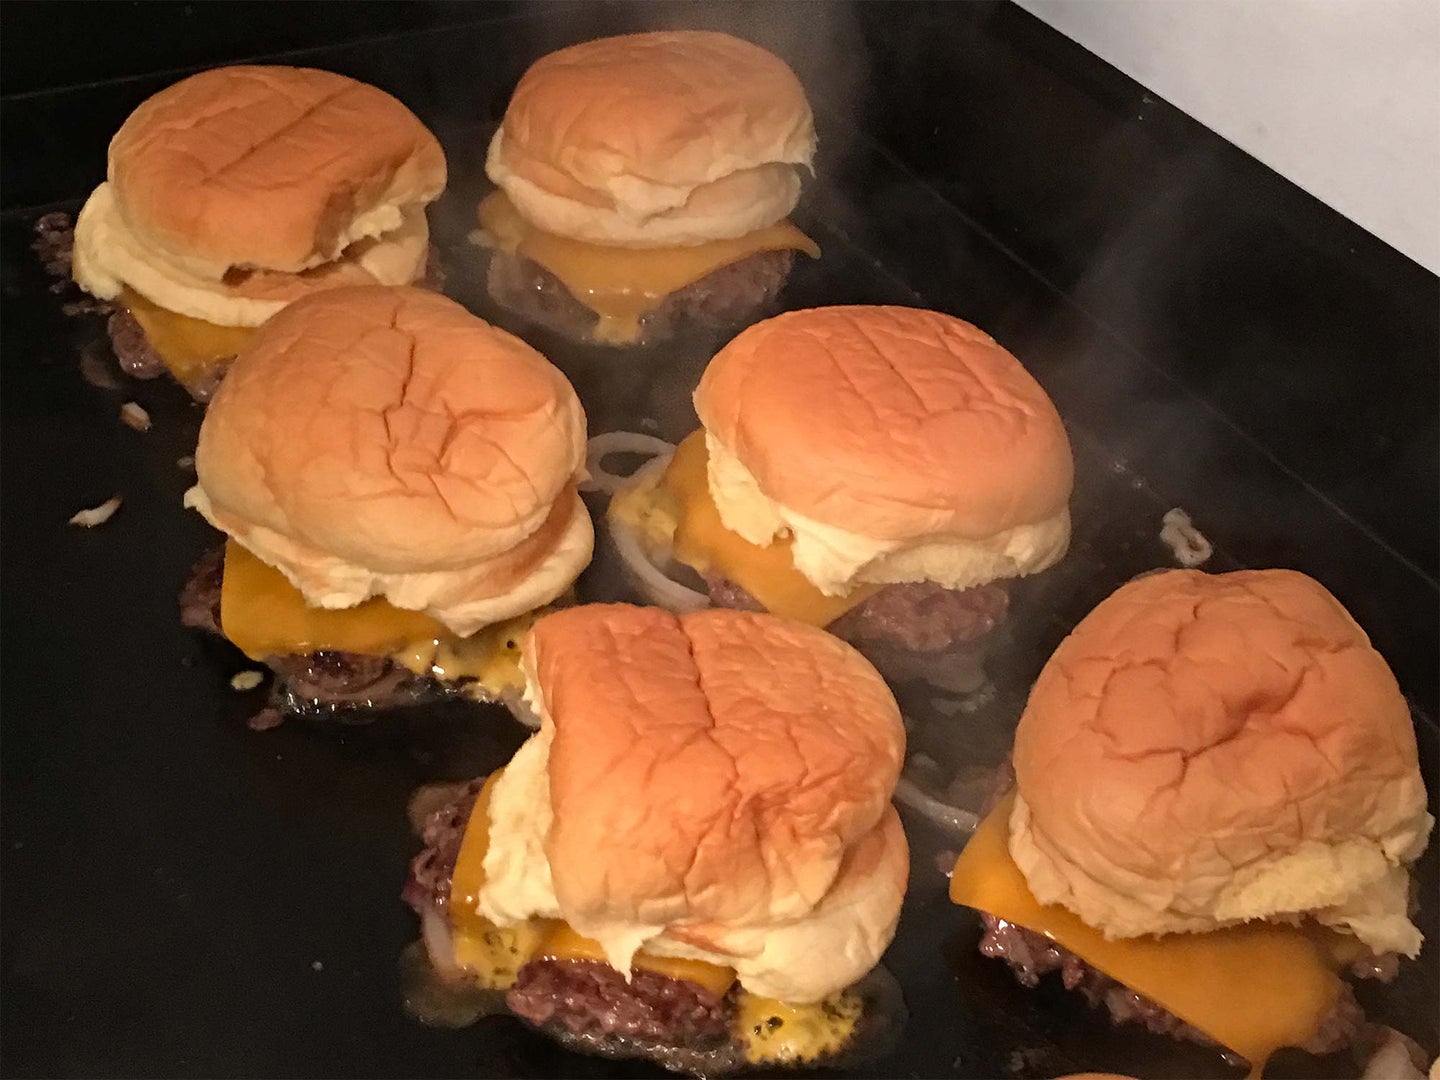 If you have a large cast-iron skillet—or, better yet, a cast-iron griddle—get it scorching hot on the stove, channel your inner shorter-order cook, and whip up a batch of venison smash burgers. The portions in this recipe make ¼-pound cheeseburgers, but for a party, we recommend cutting the patty portions in half and making sliders. Get the recipe for <a href="https://www.fieldandstream.com/story/blogs/wild-chef/ultimate-super-bowl-food-menu-hunters-anglers/">Venison Smash Burgers</a>.